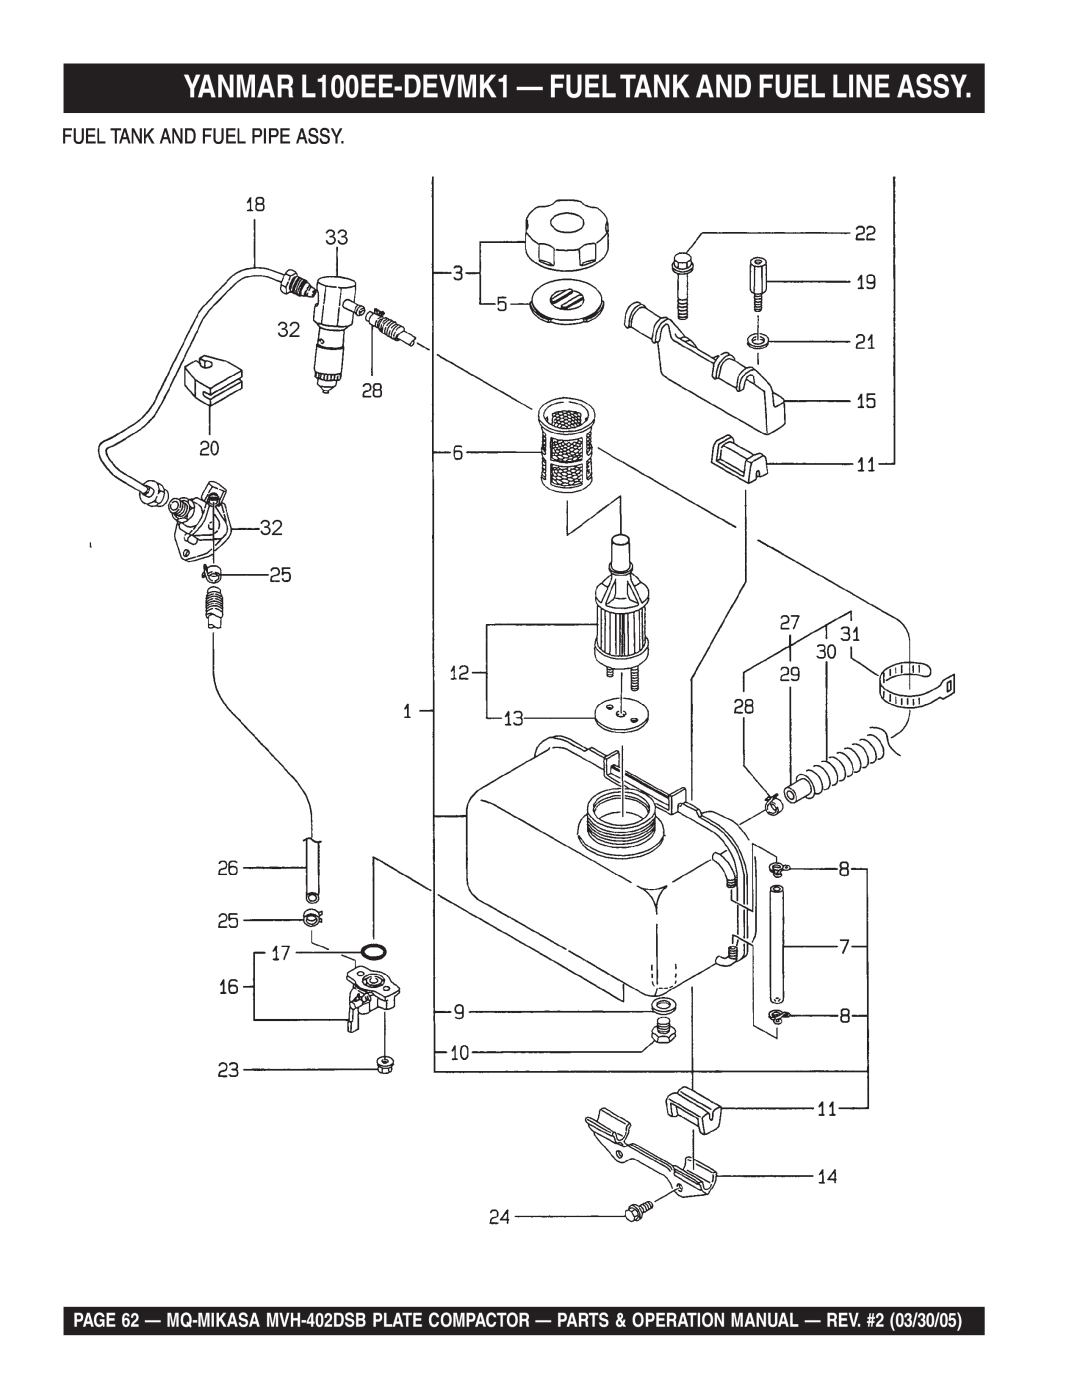 Multiquip MVH-402DSB manual YANMAR L100EE-DEVMK1- FUELTANK AND FUEL LINE ASSY, Fuel Tank And Fuel Pipe Assy 